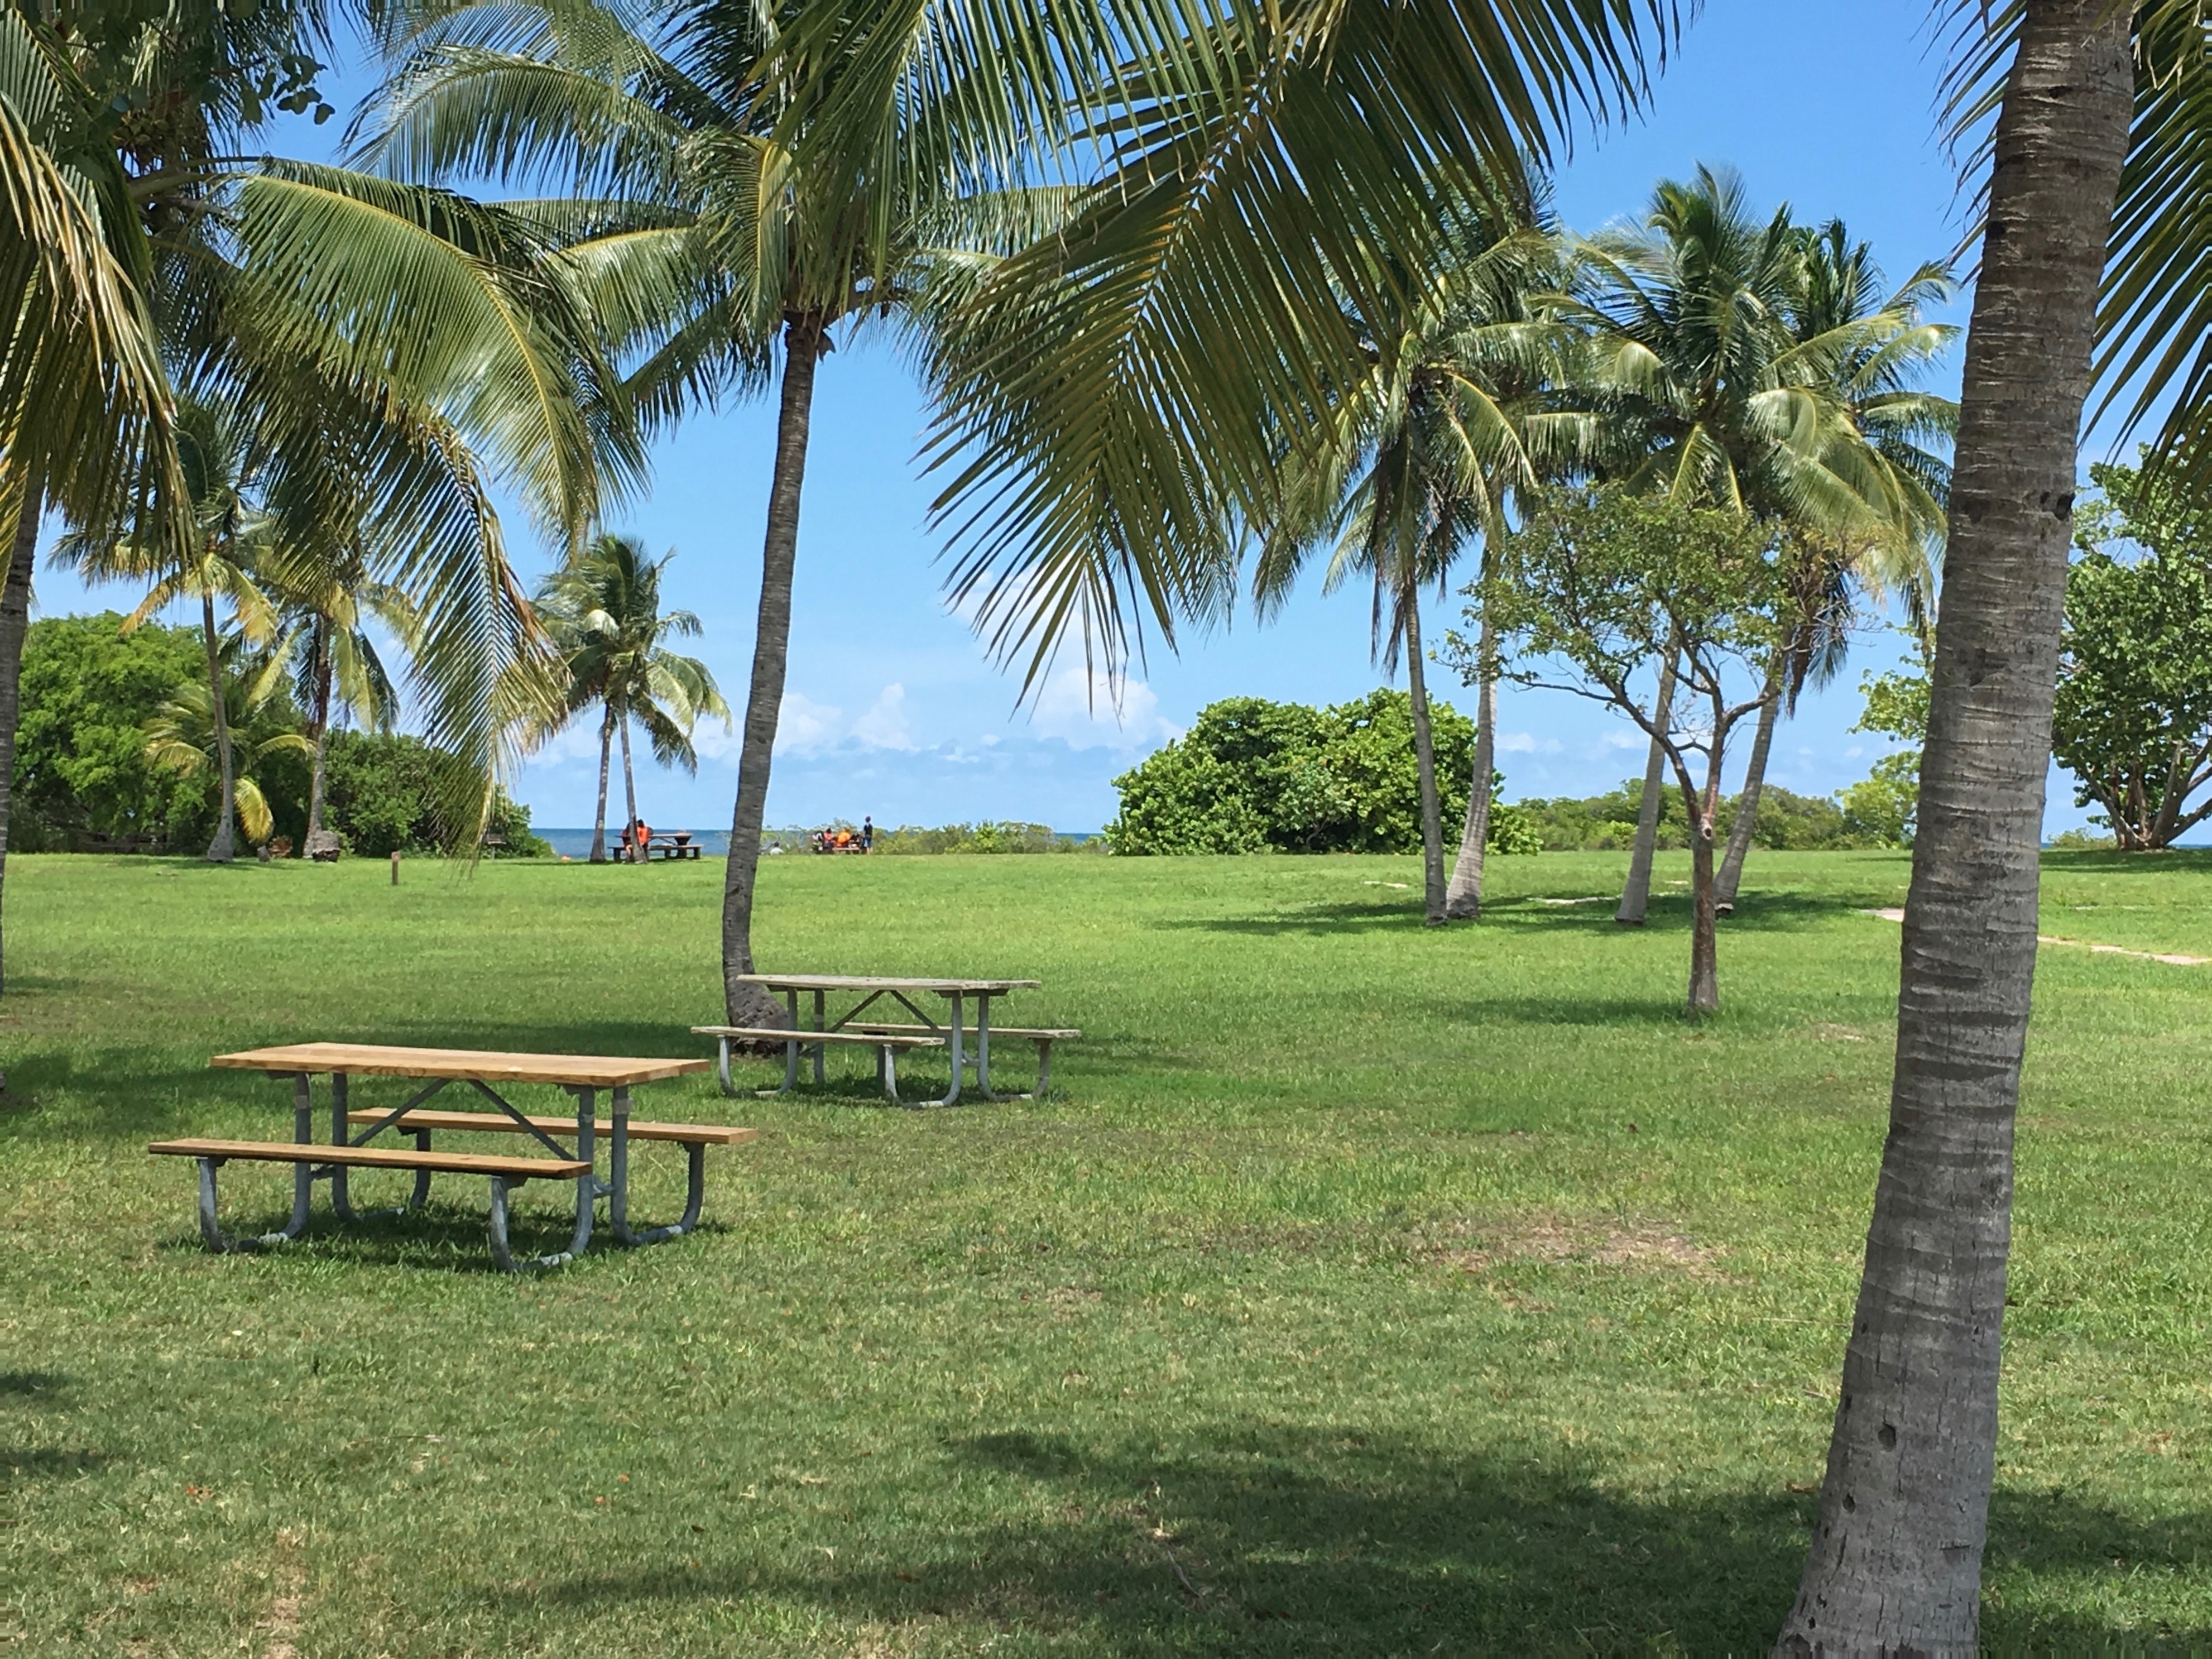 Grassy open area with palm trees, picnic tables and people camping in the distance.